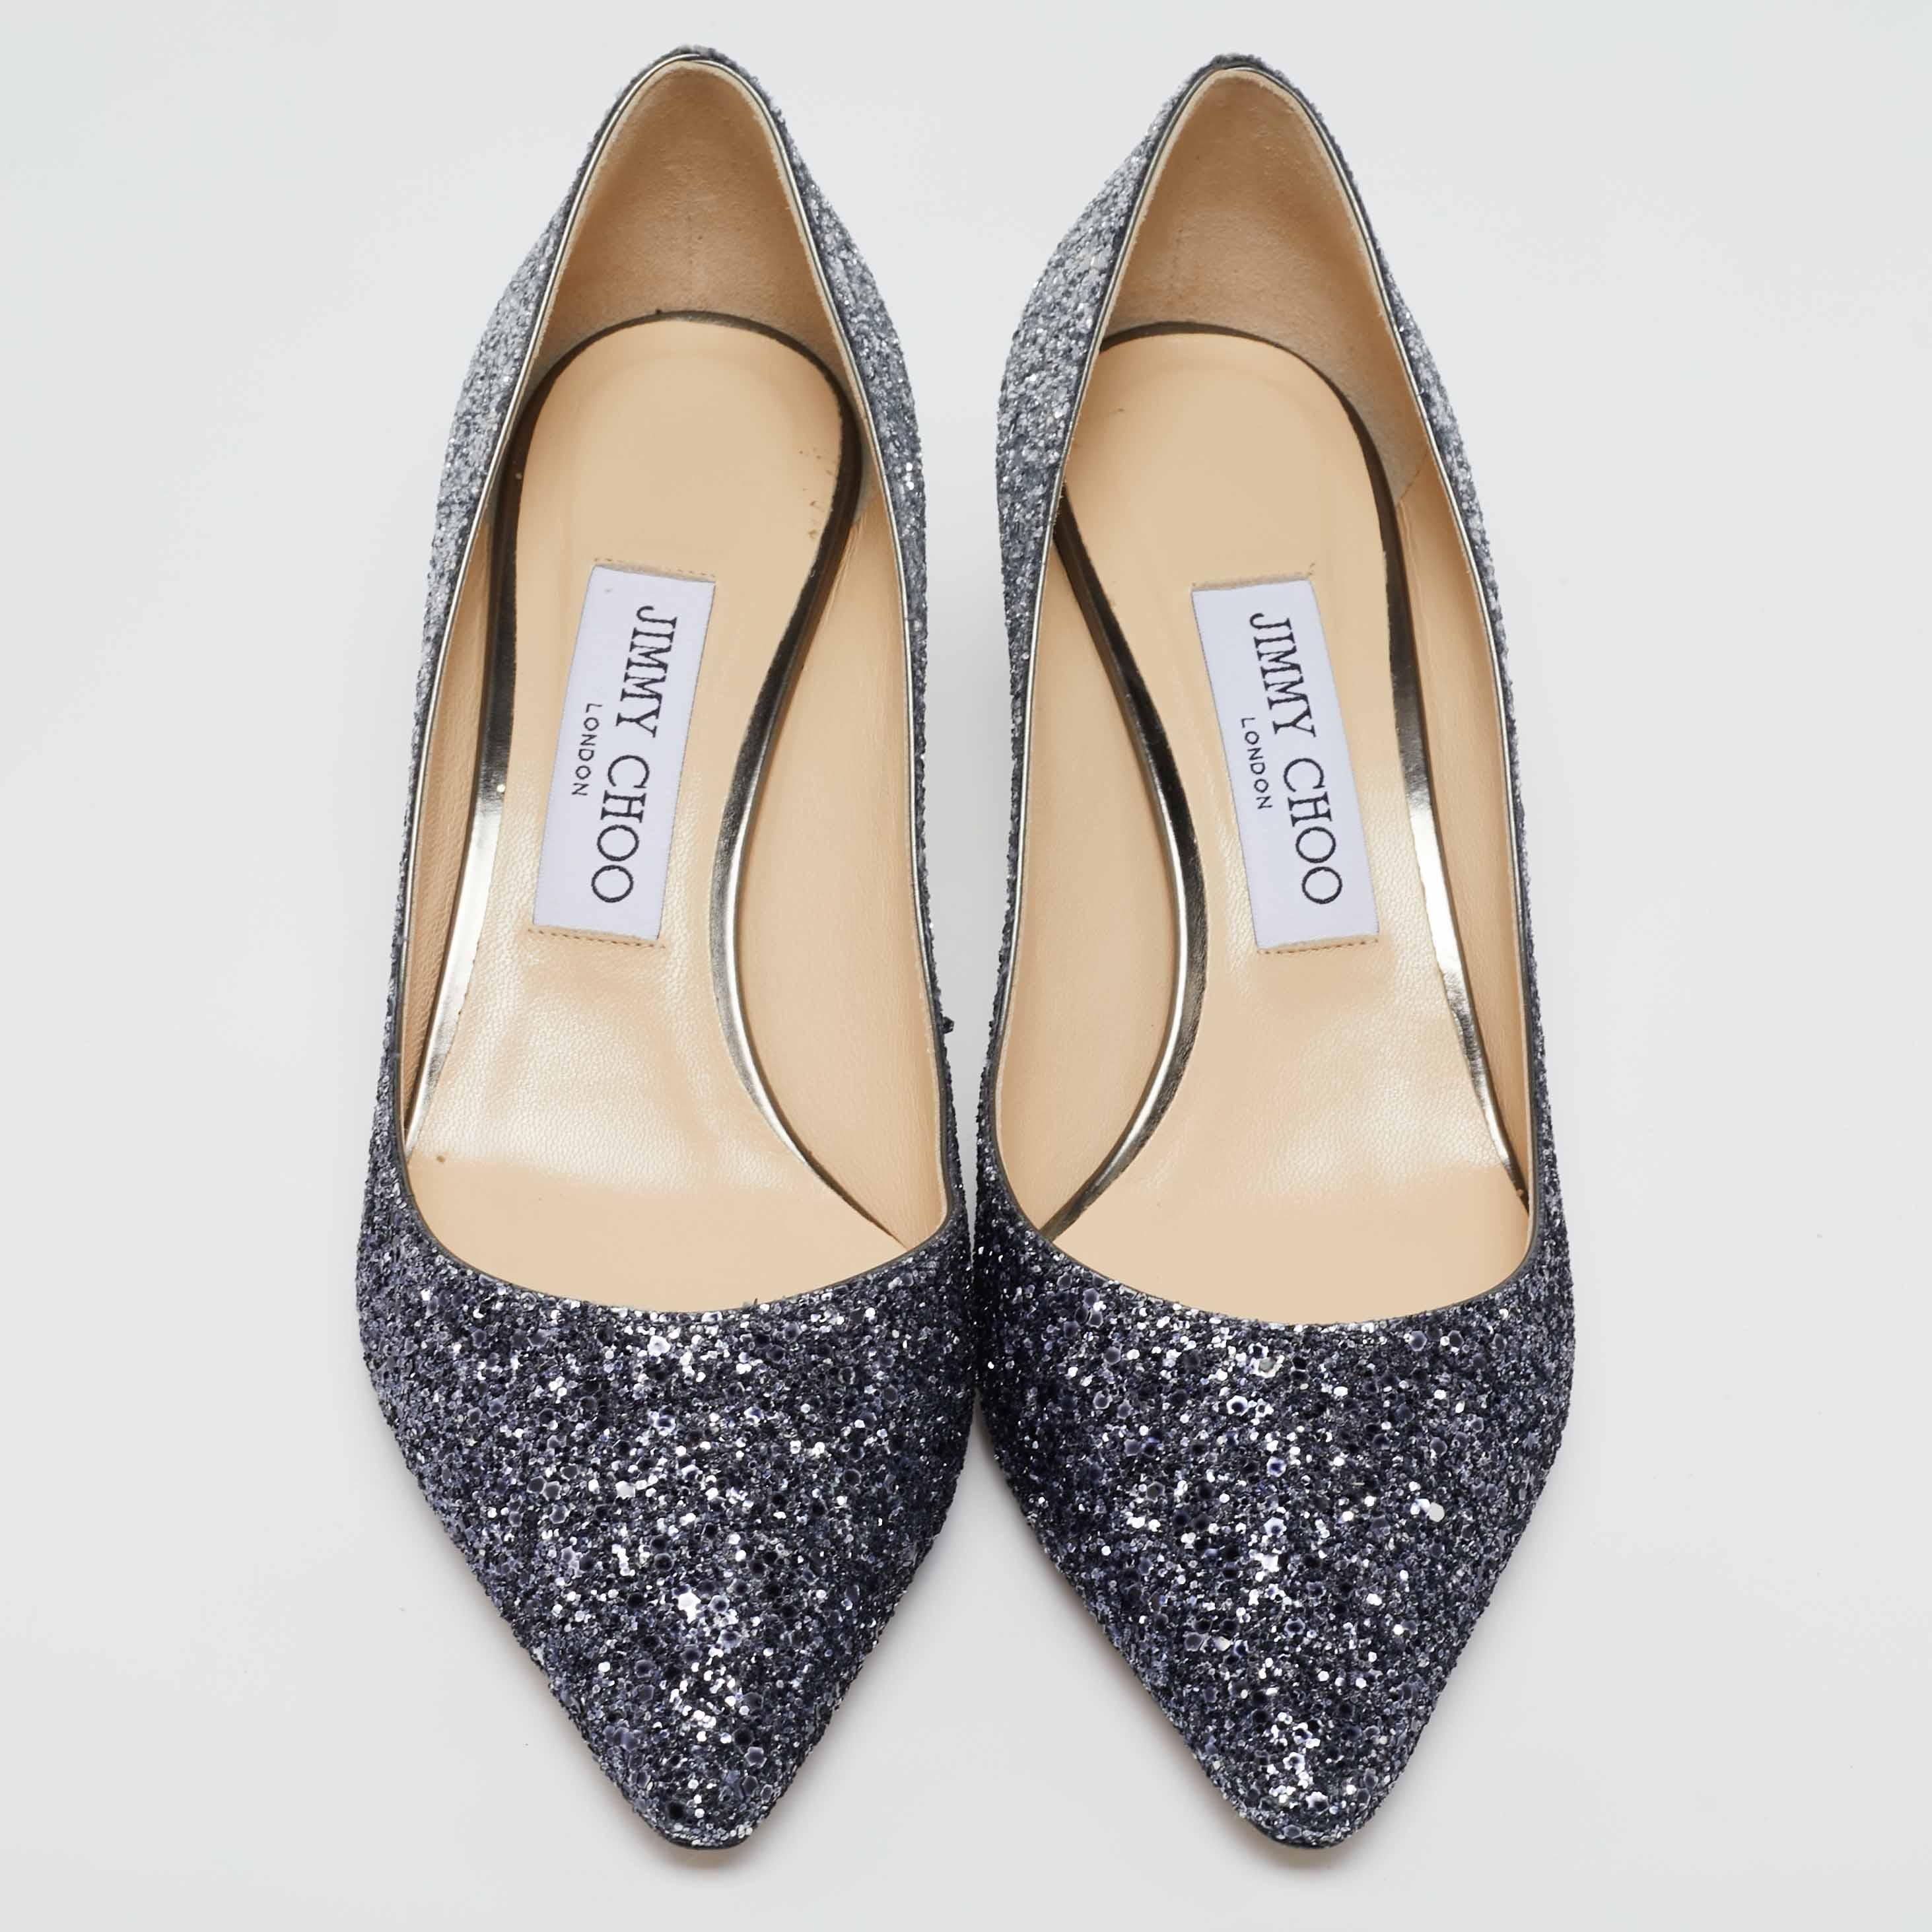 Known for their elegant and high fashion designs, Jimmy Choo never fails. Make a style statement while flaunting this pair that has been made in Italy. Crafted from glitter, they feature pointed toes, 6.5 cm heels and snug insoles.

Includes: